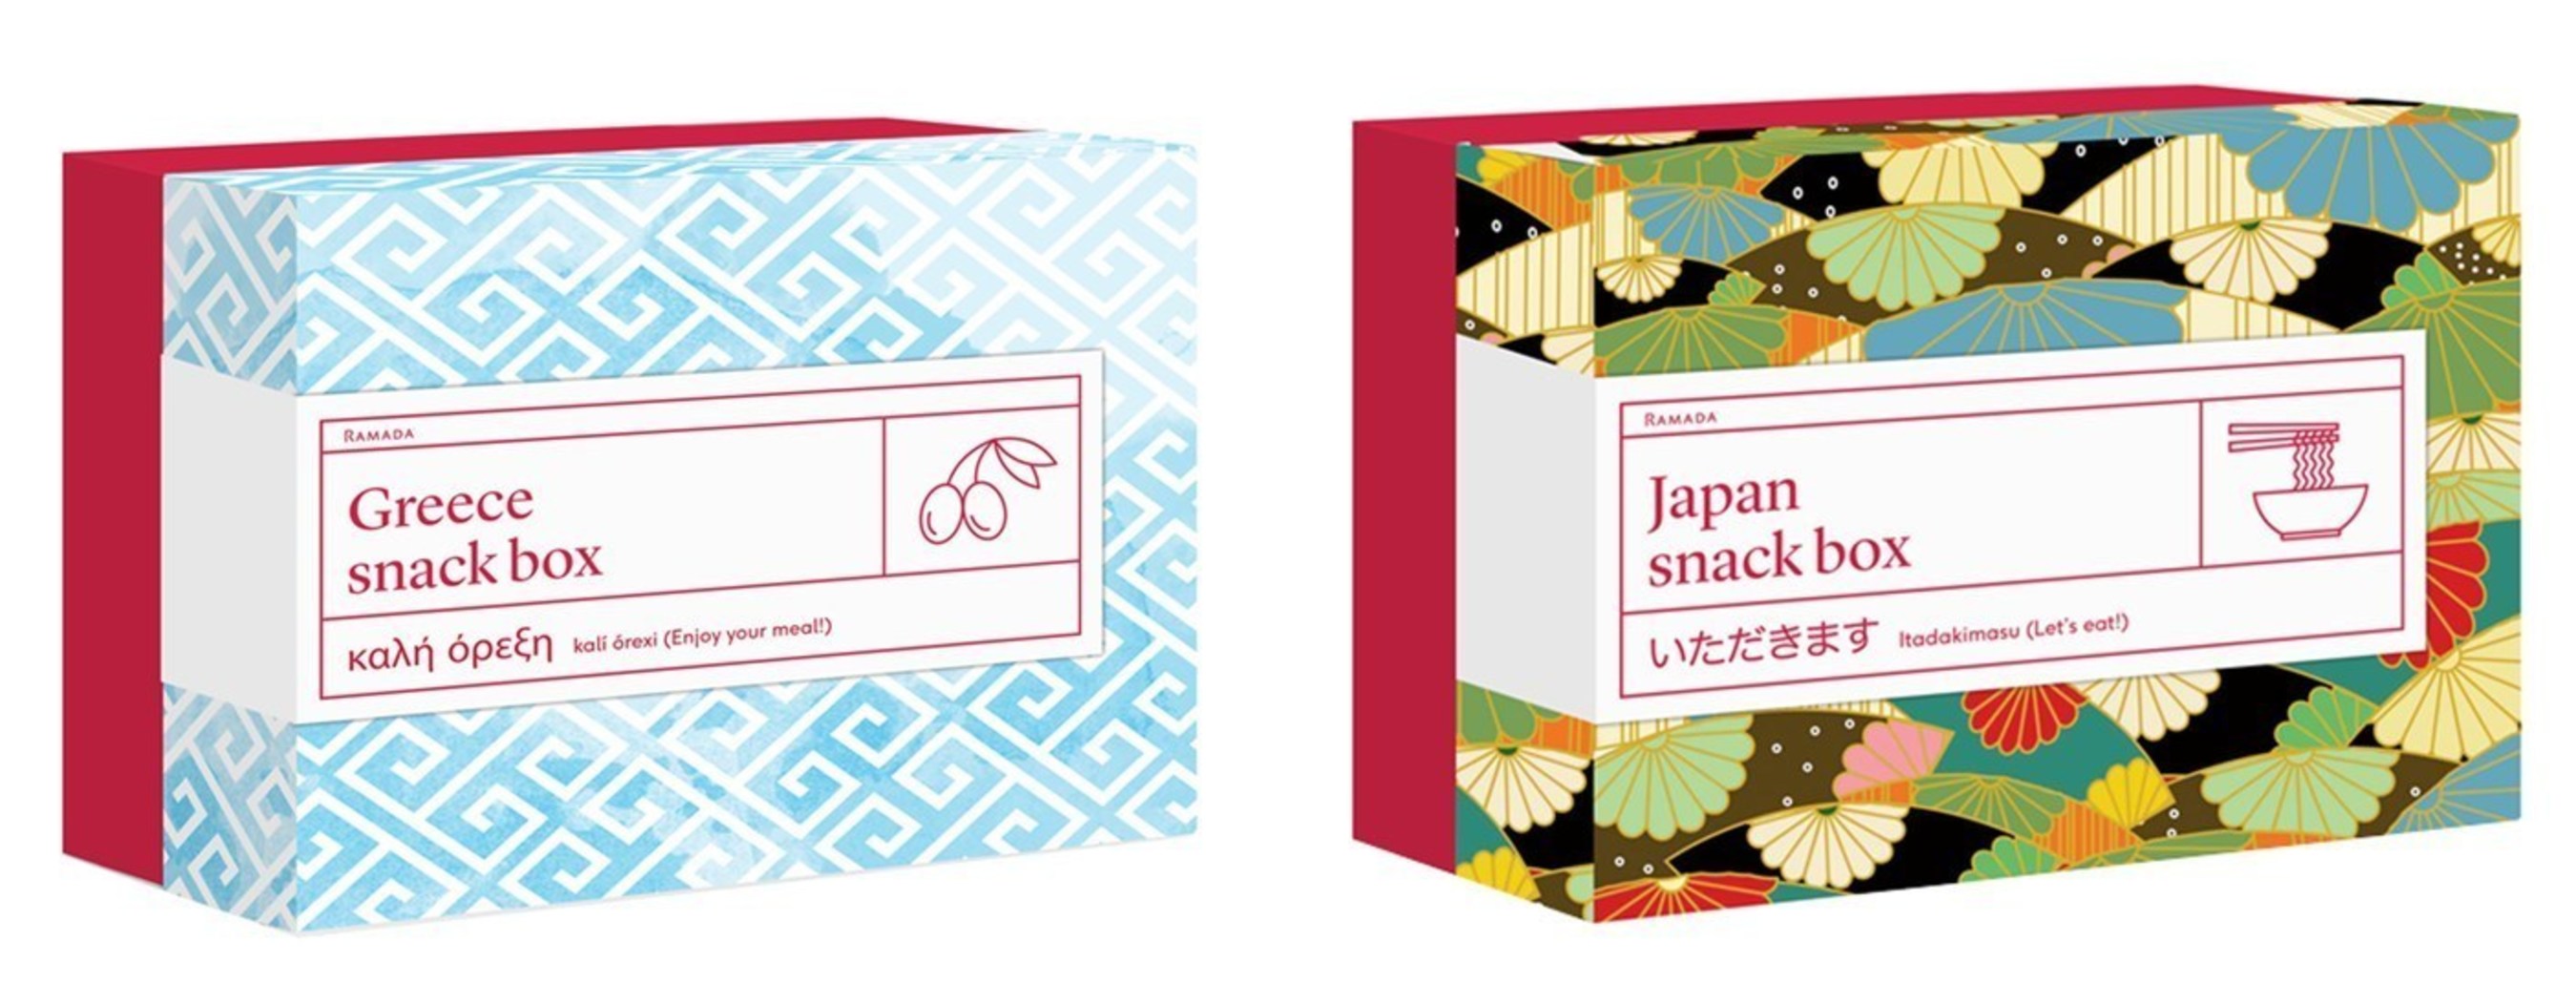 The globally inspired Ramada Bento Box, launching later this year, is a new food and beverage initiative inspired by Ramada's "Sample the World" brand promise.